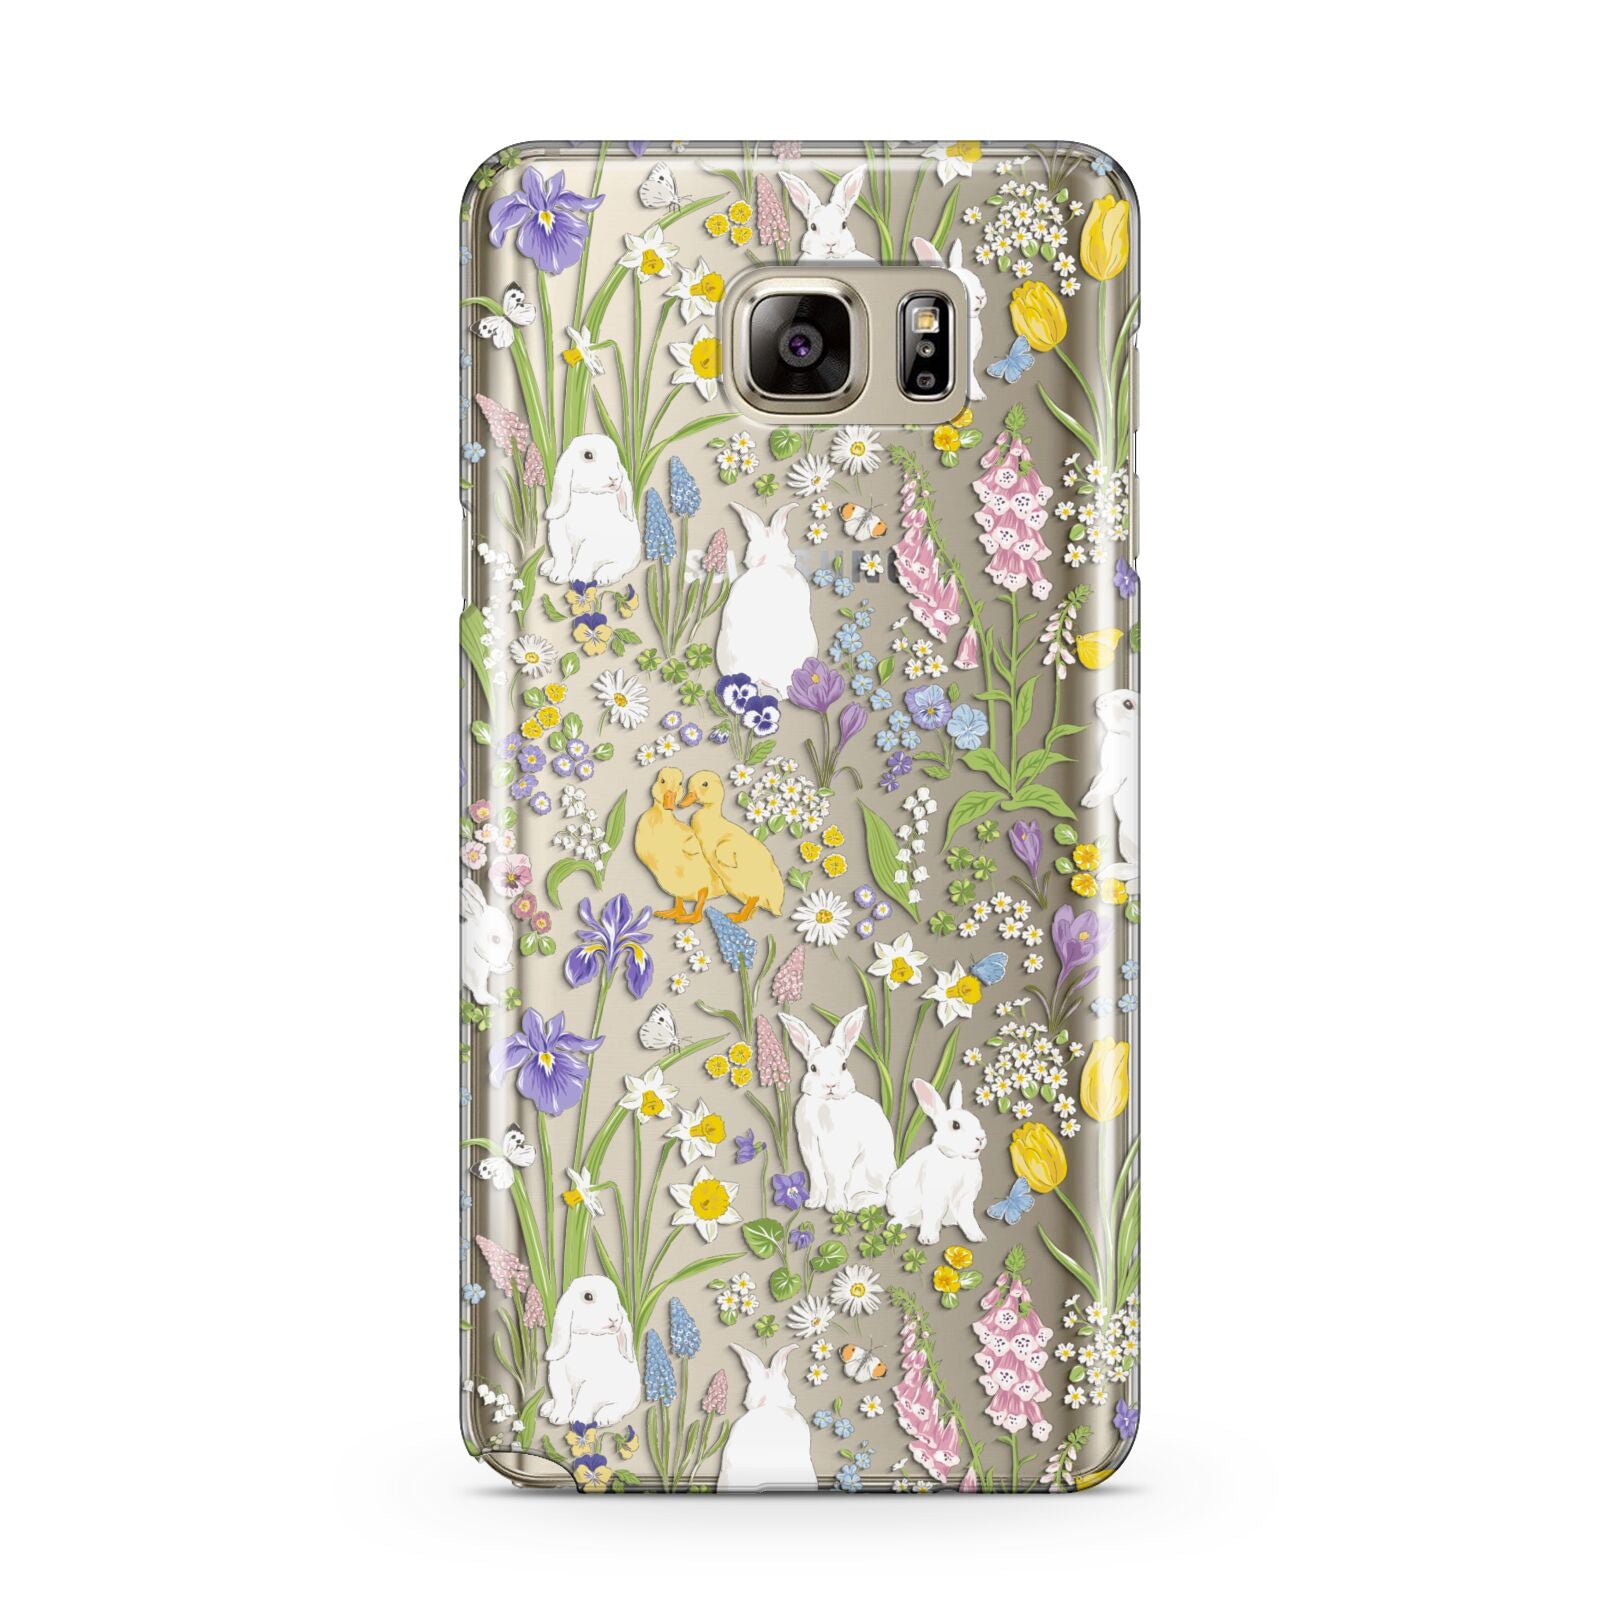 Easter Samsung Galaxy Note 5 Case